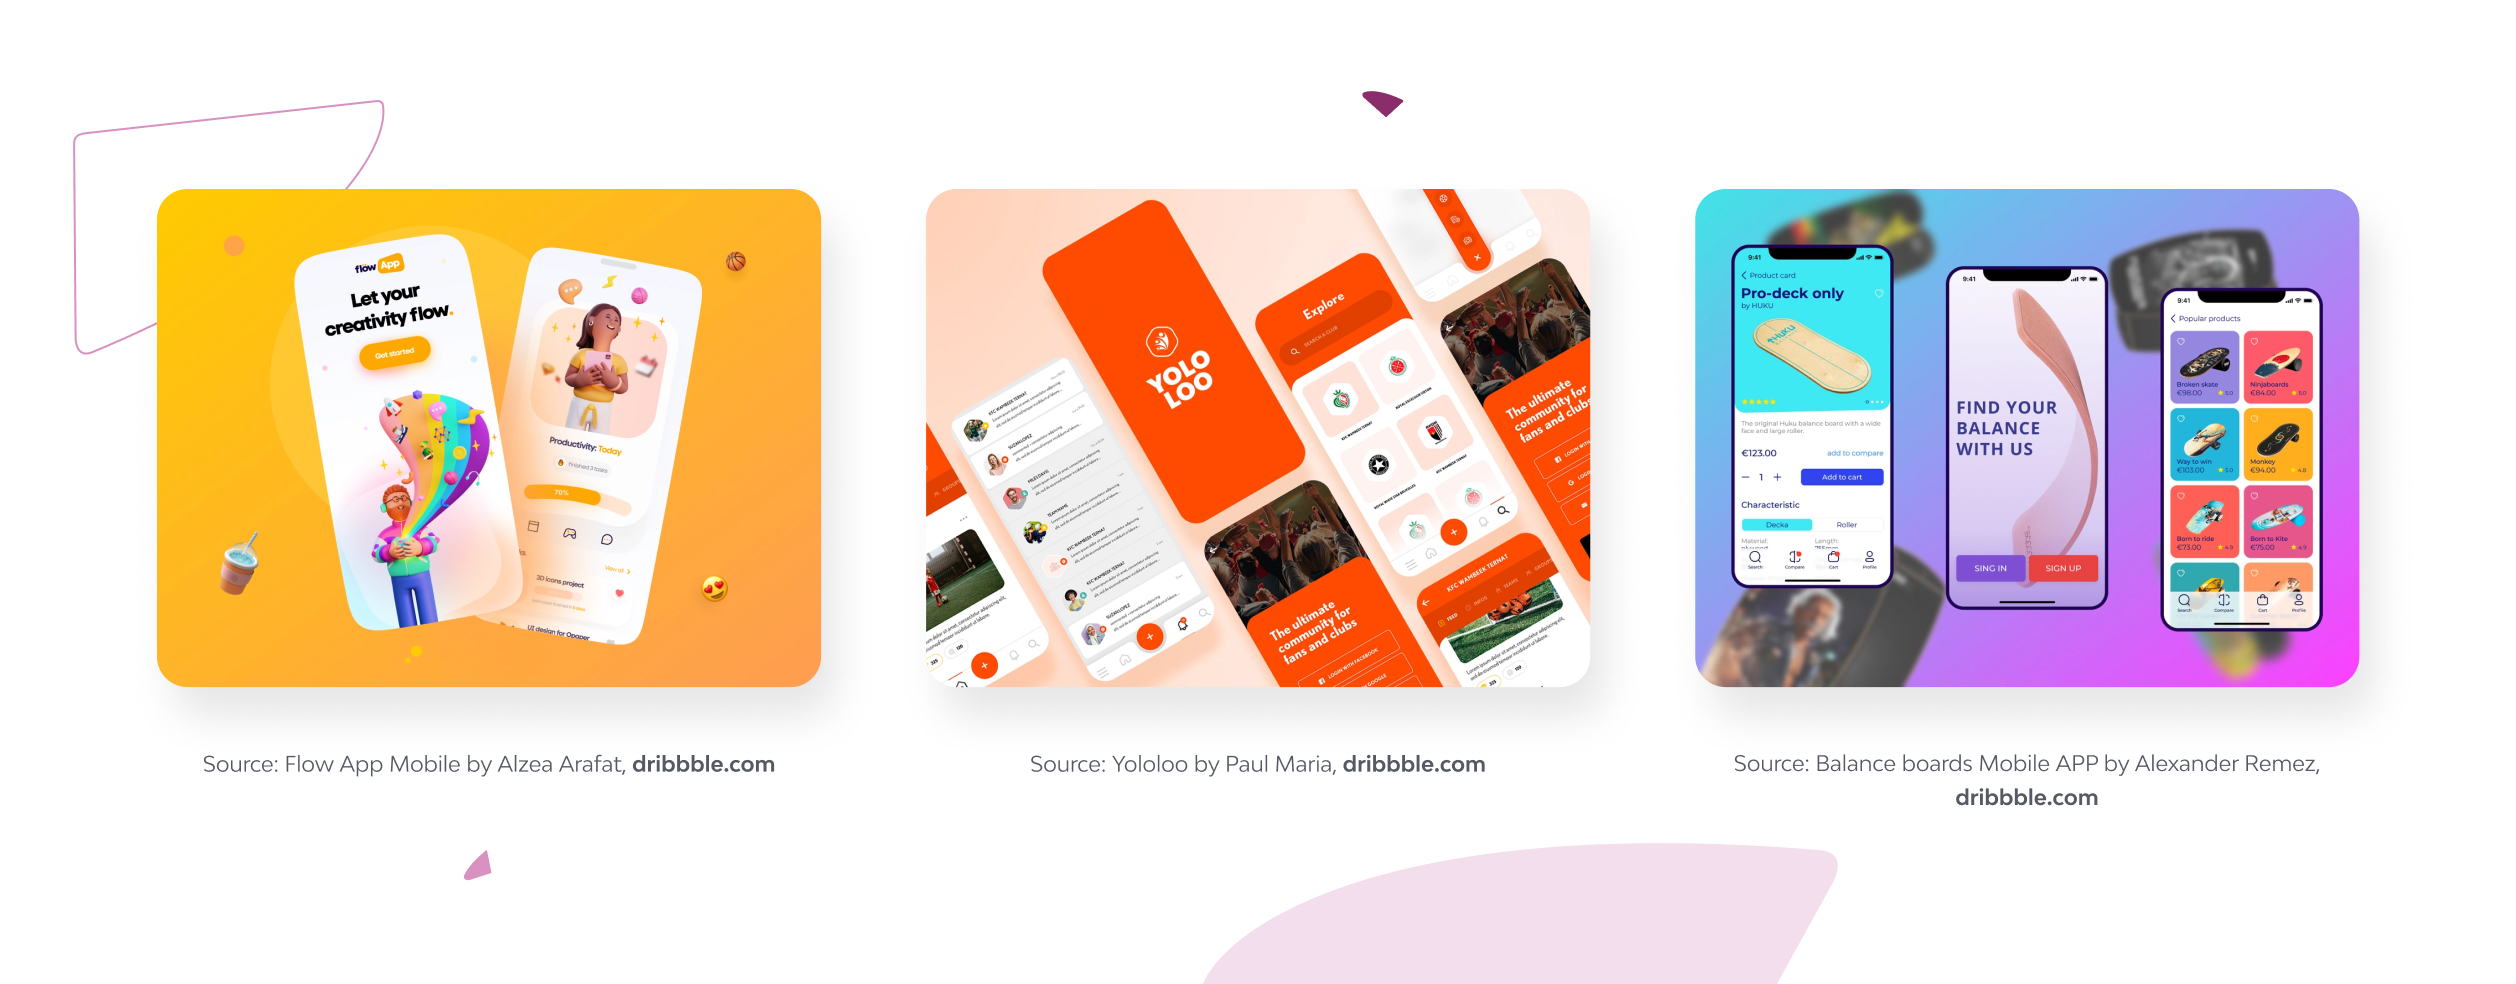 15 Upcoming UI/UX Design Trends For 2023 1